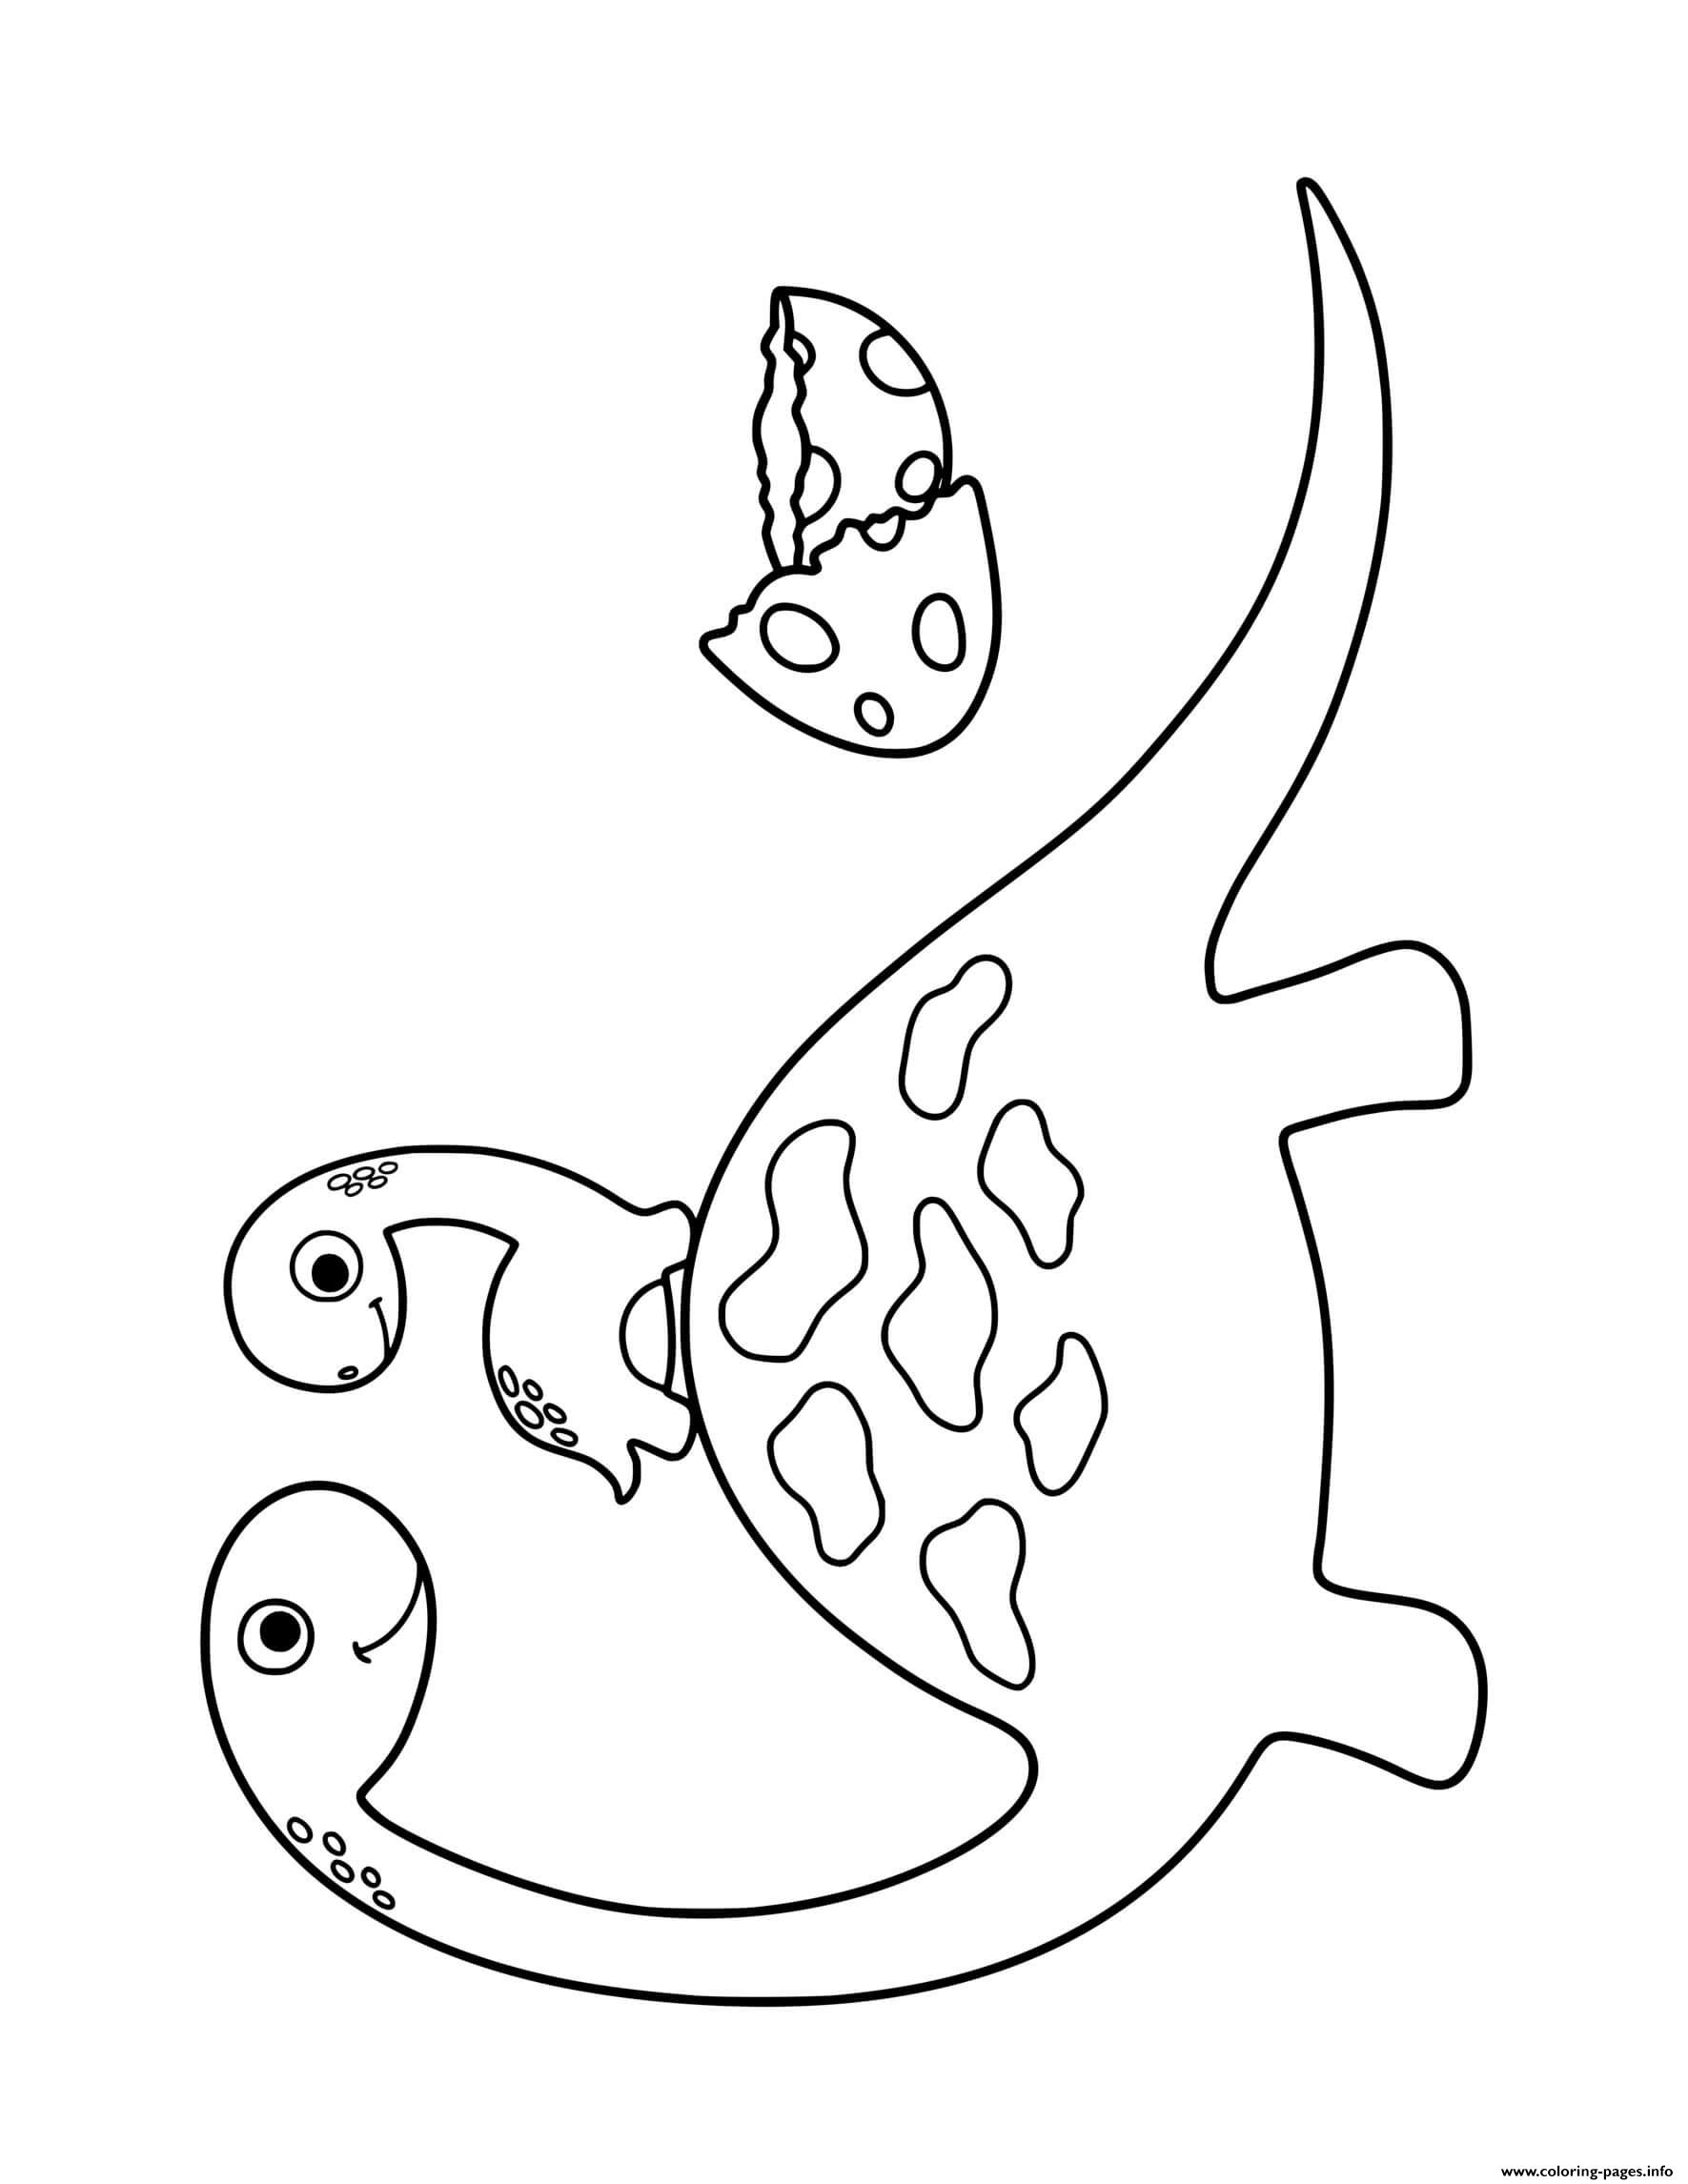 Dinosaur Mom With Baby Dinosaur For Preschoolers coloring